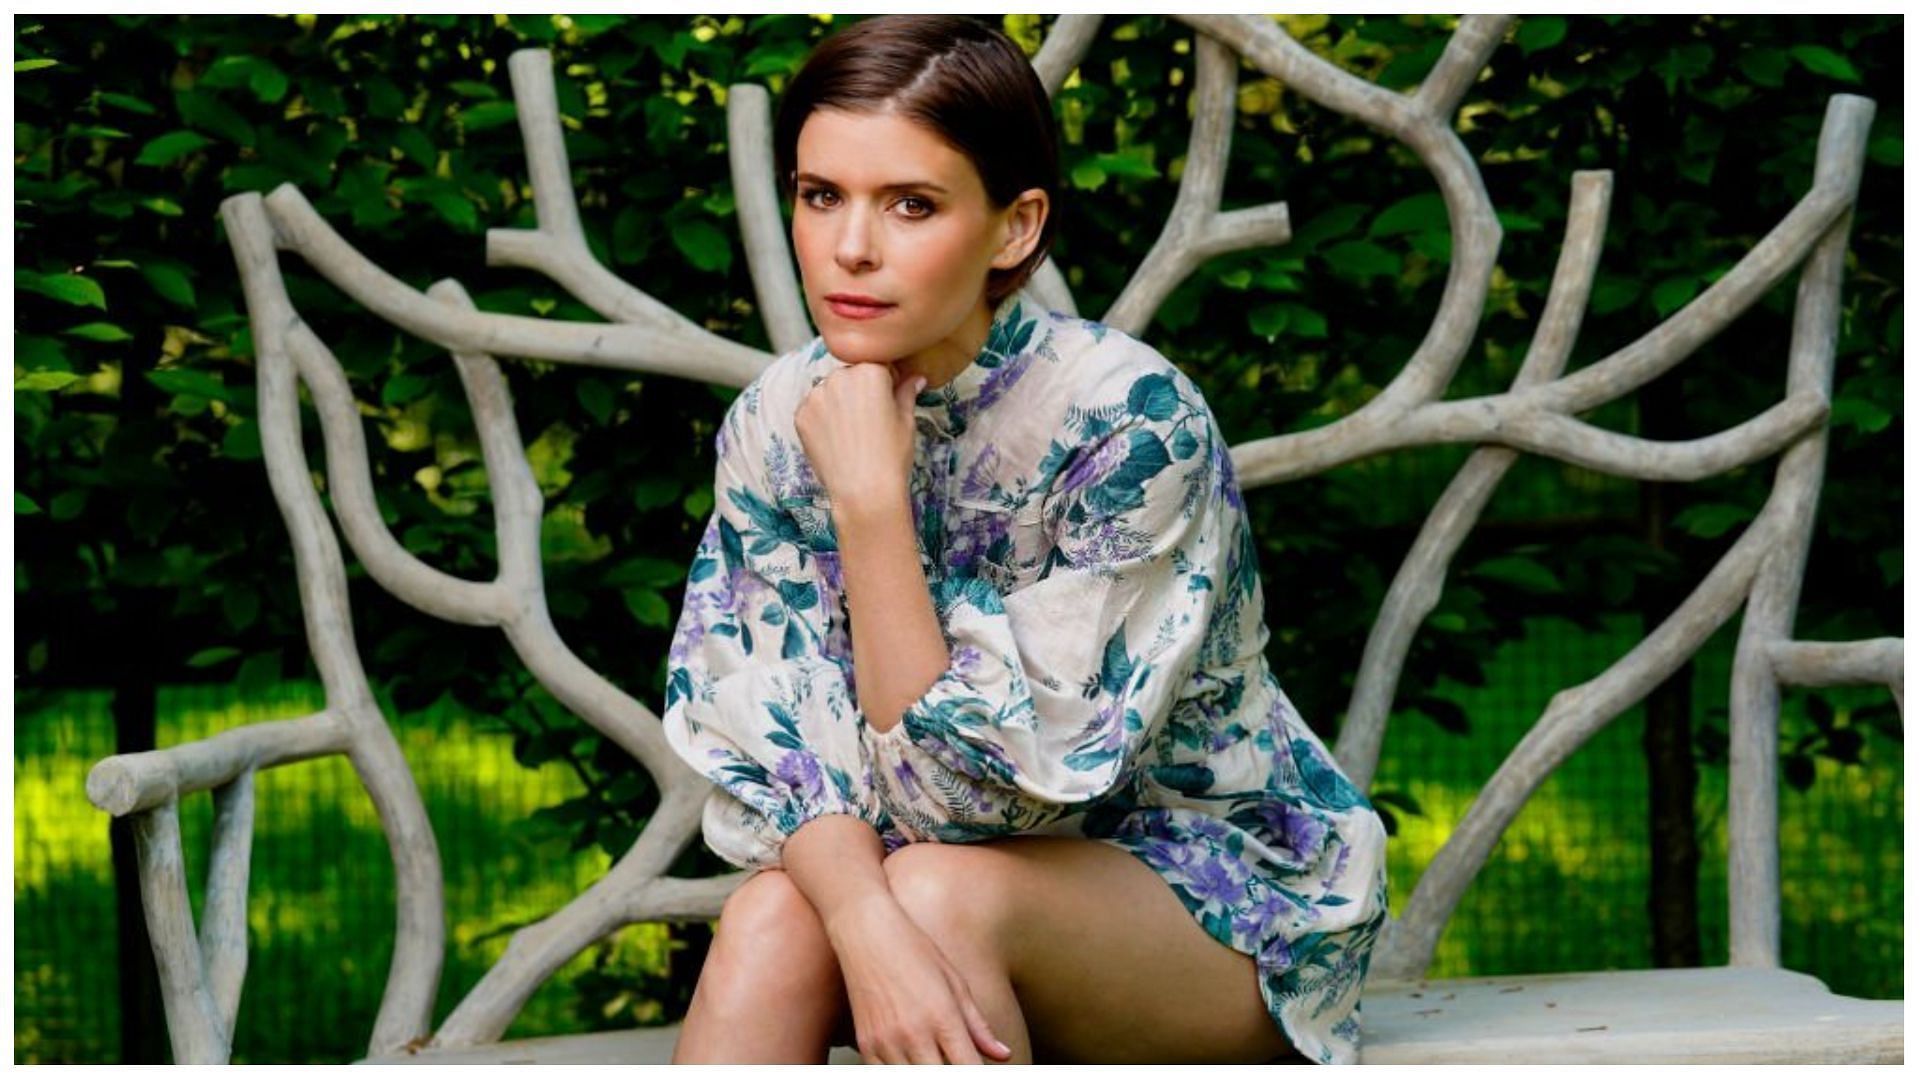 Kate Mara has appeared in many films and TV series (Image via Kirk McKoy/Getty Images)